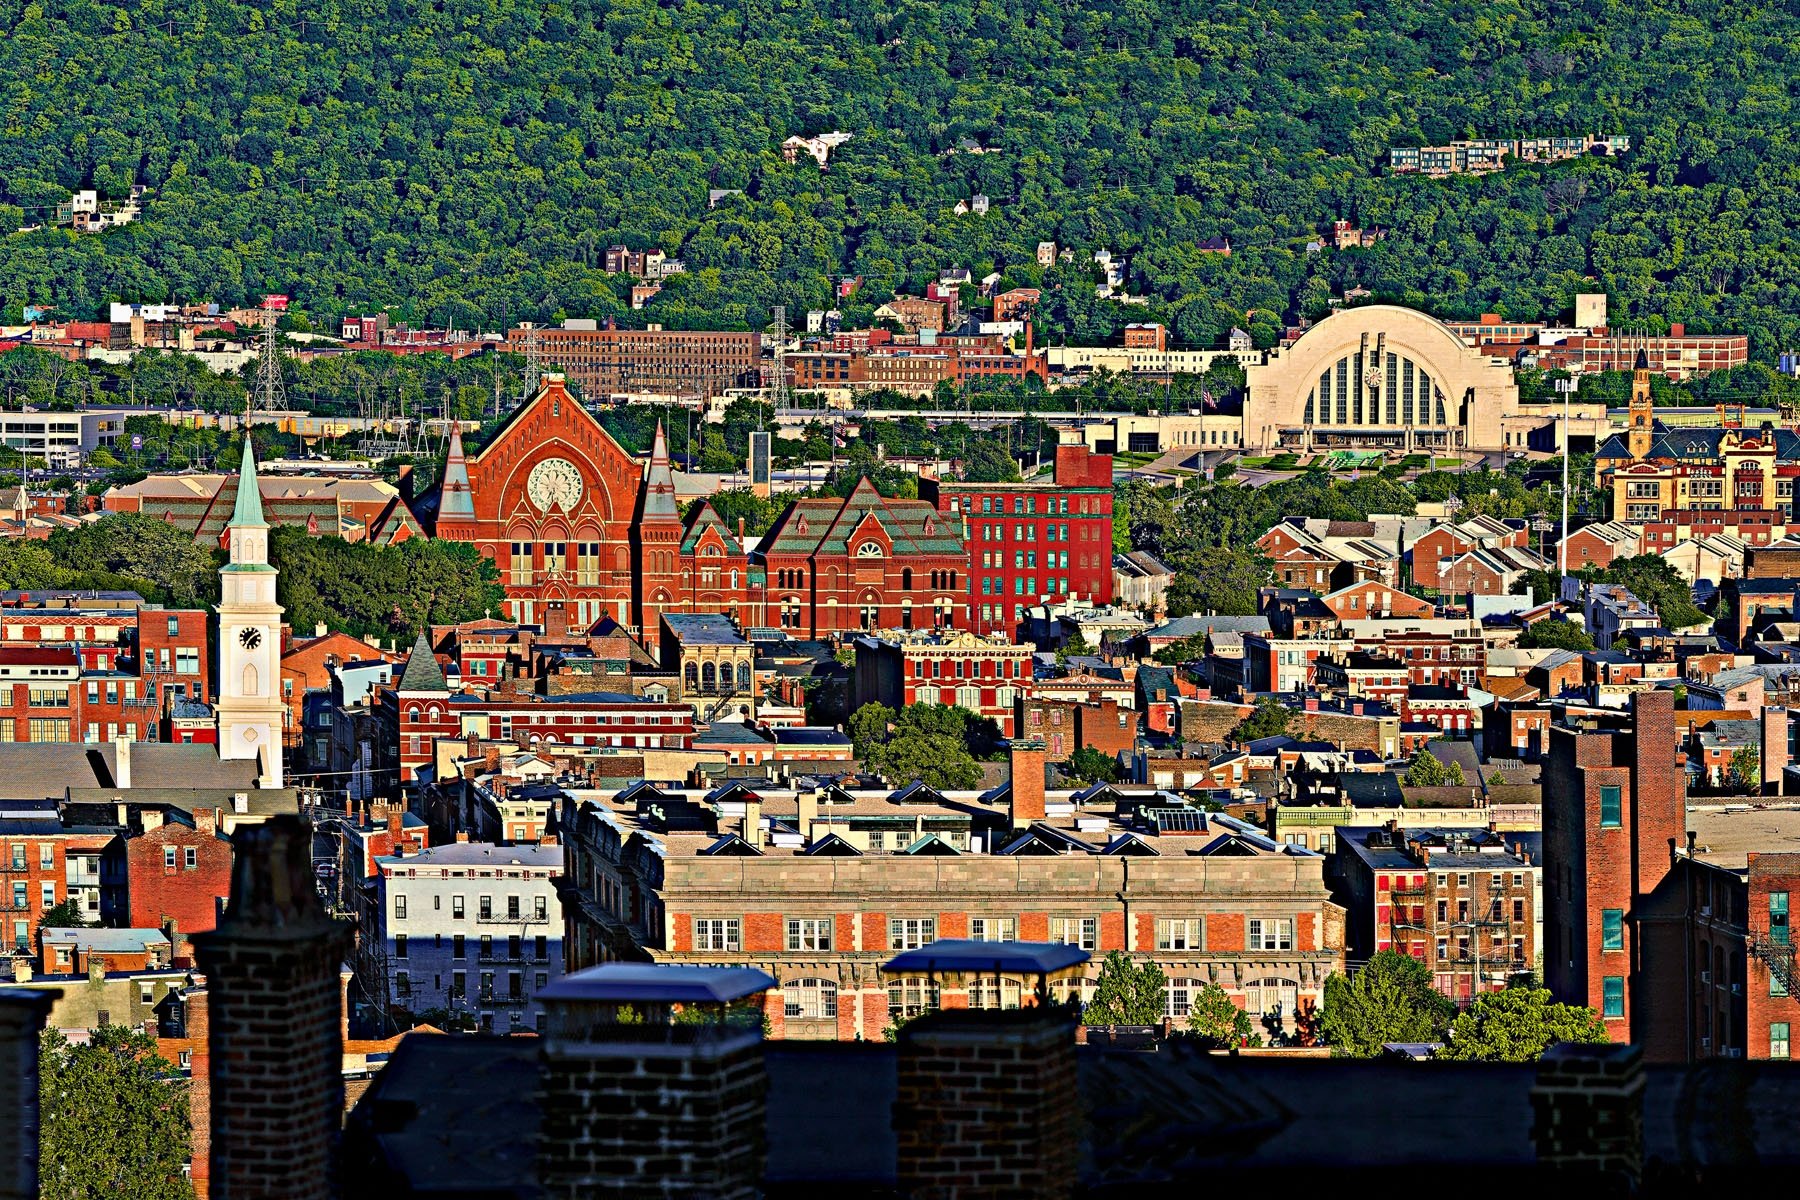 OVER THE RHINE - This view of the "over the rhine" area in Cincinnati covers about two miles. That means there can be no haze if you want a clear shot. There aren't many haze-free summer days in Cincinnati. I tried often, but it took me almost two years to get this shot.